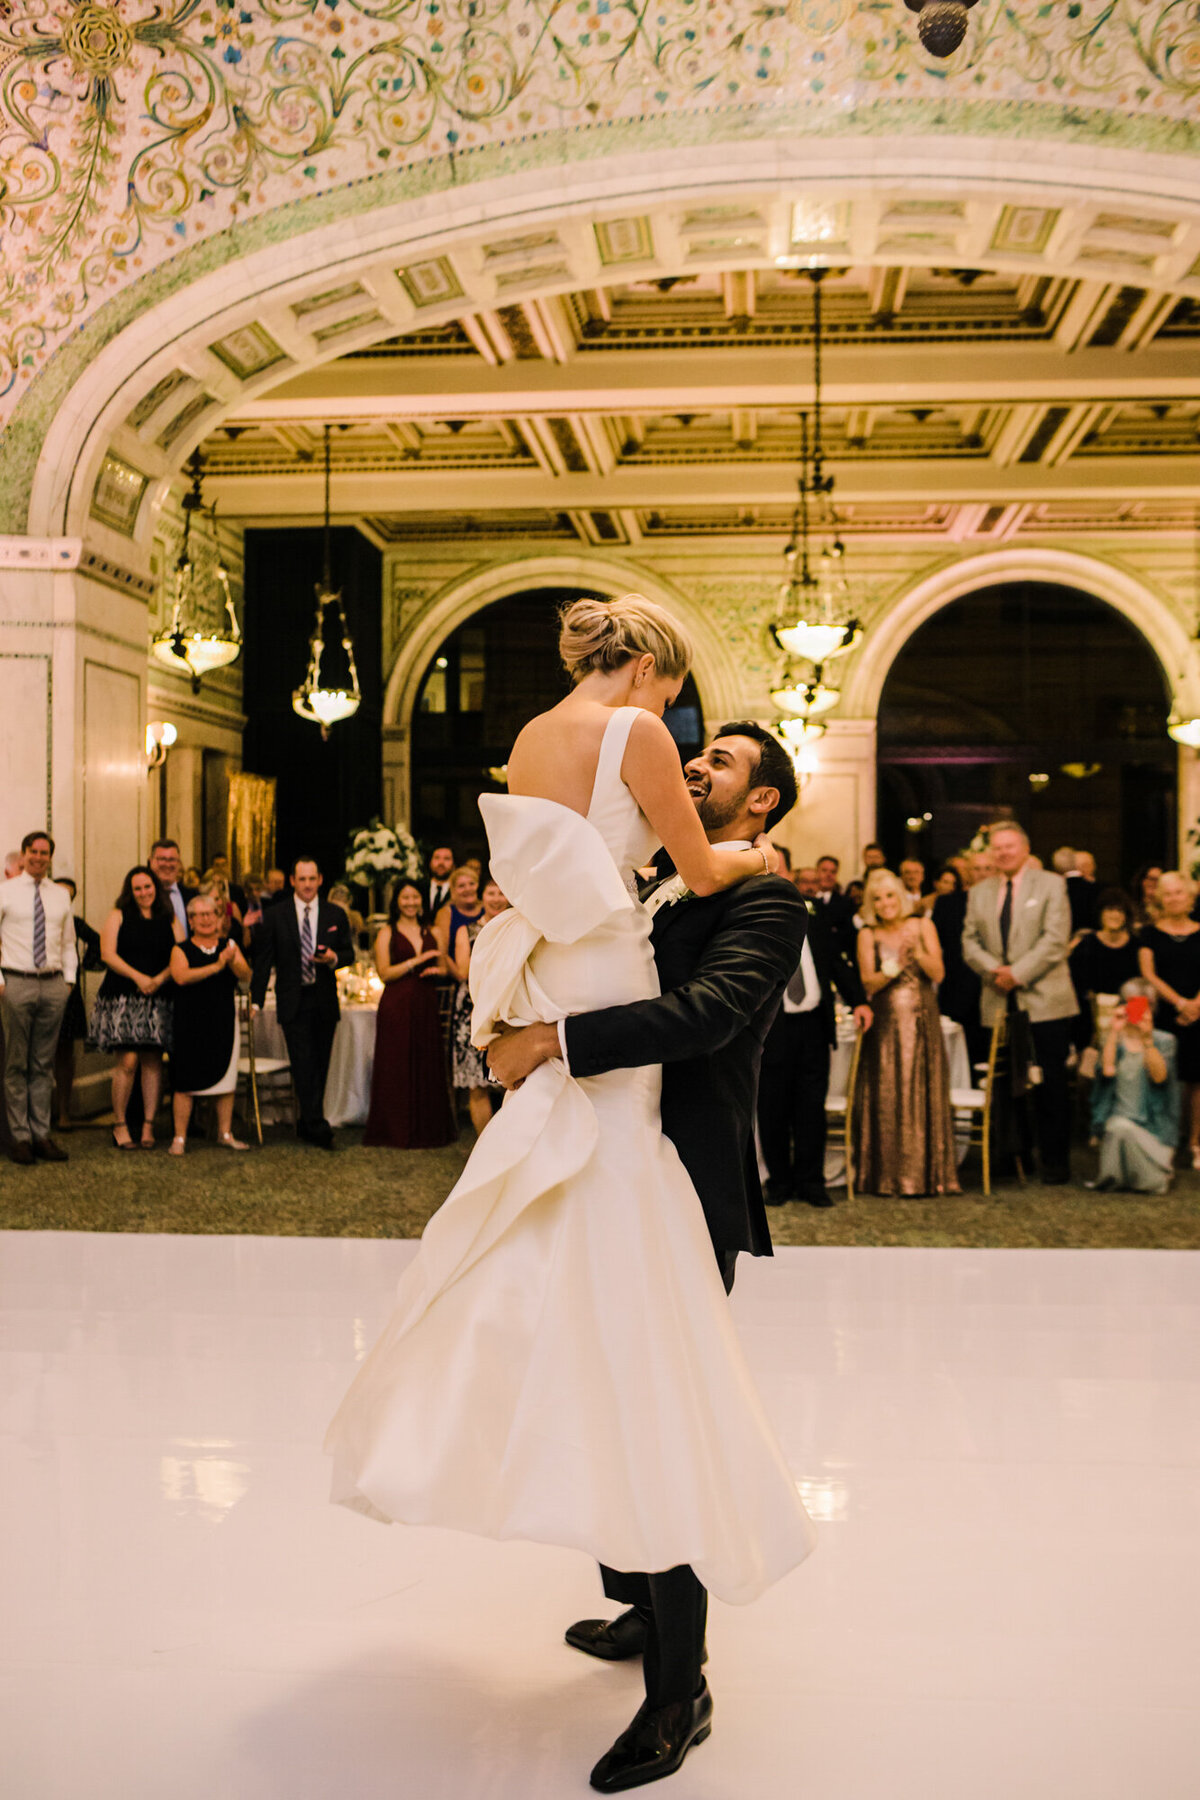 A beautiful first dance moment captured at the Chicago Cultural Center